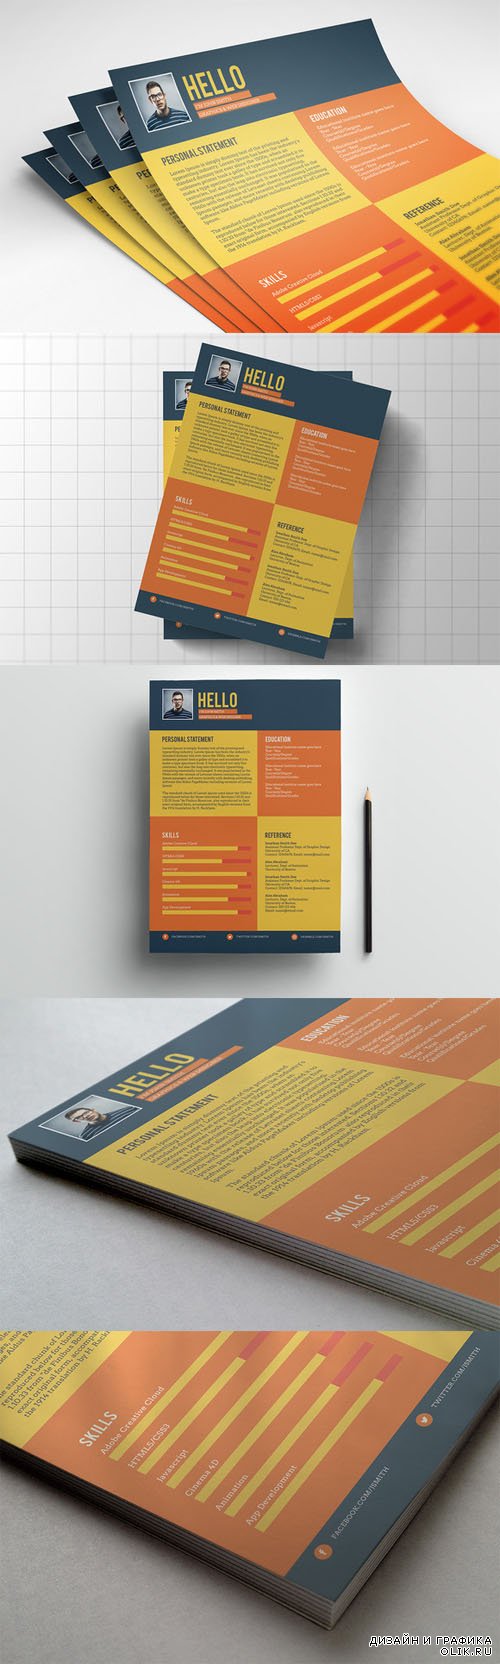 Flat Style Resume Template PSD